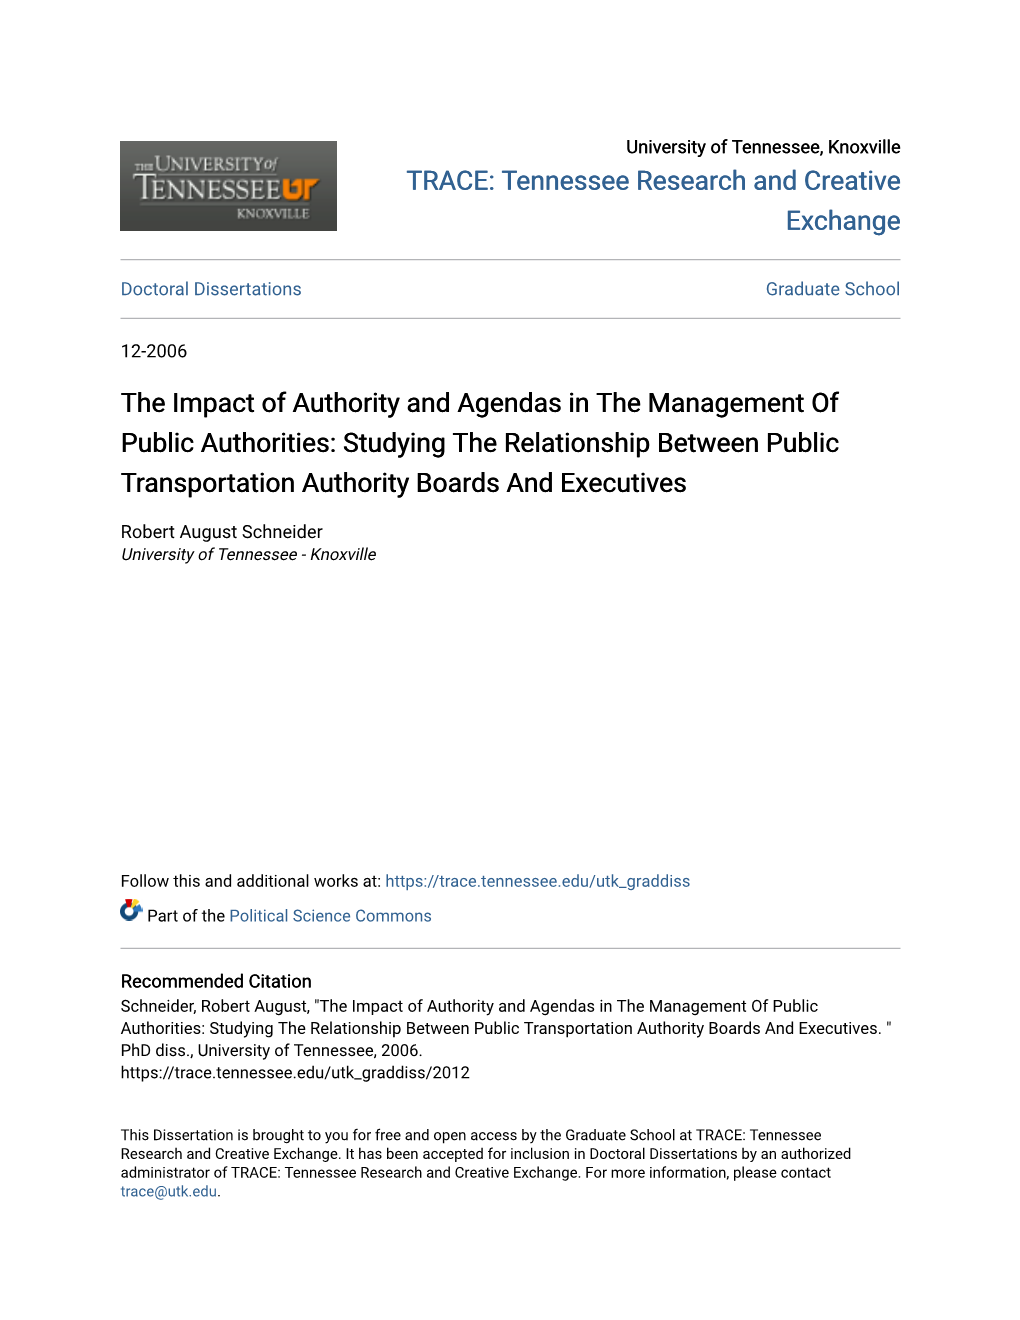 Studying the Relationship Between Public Transportation Authority Boards and Executives